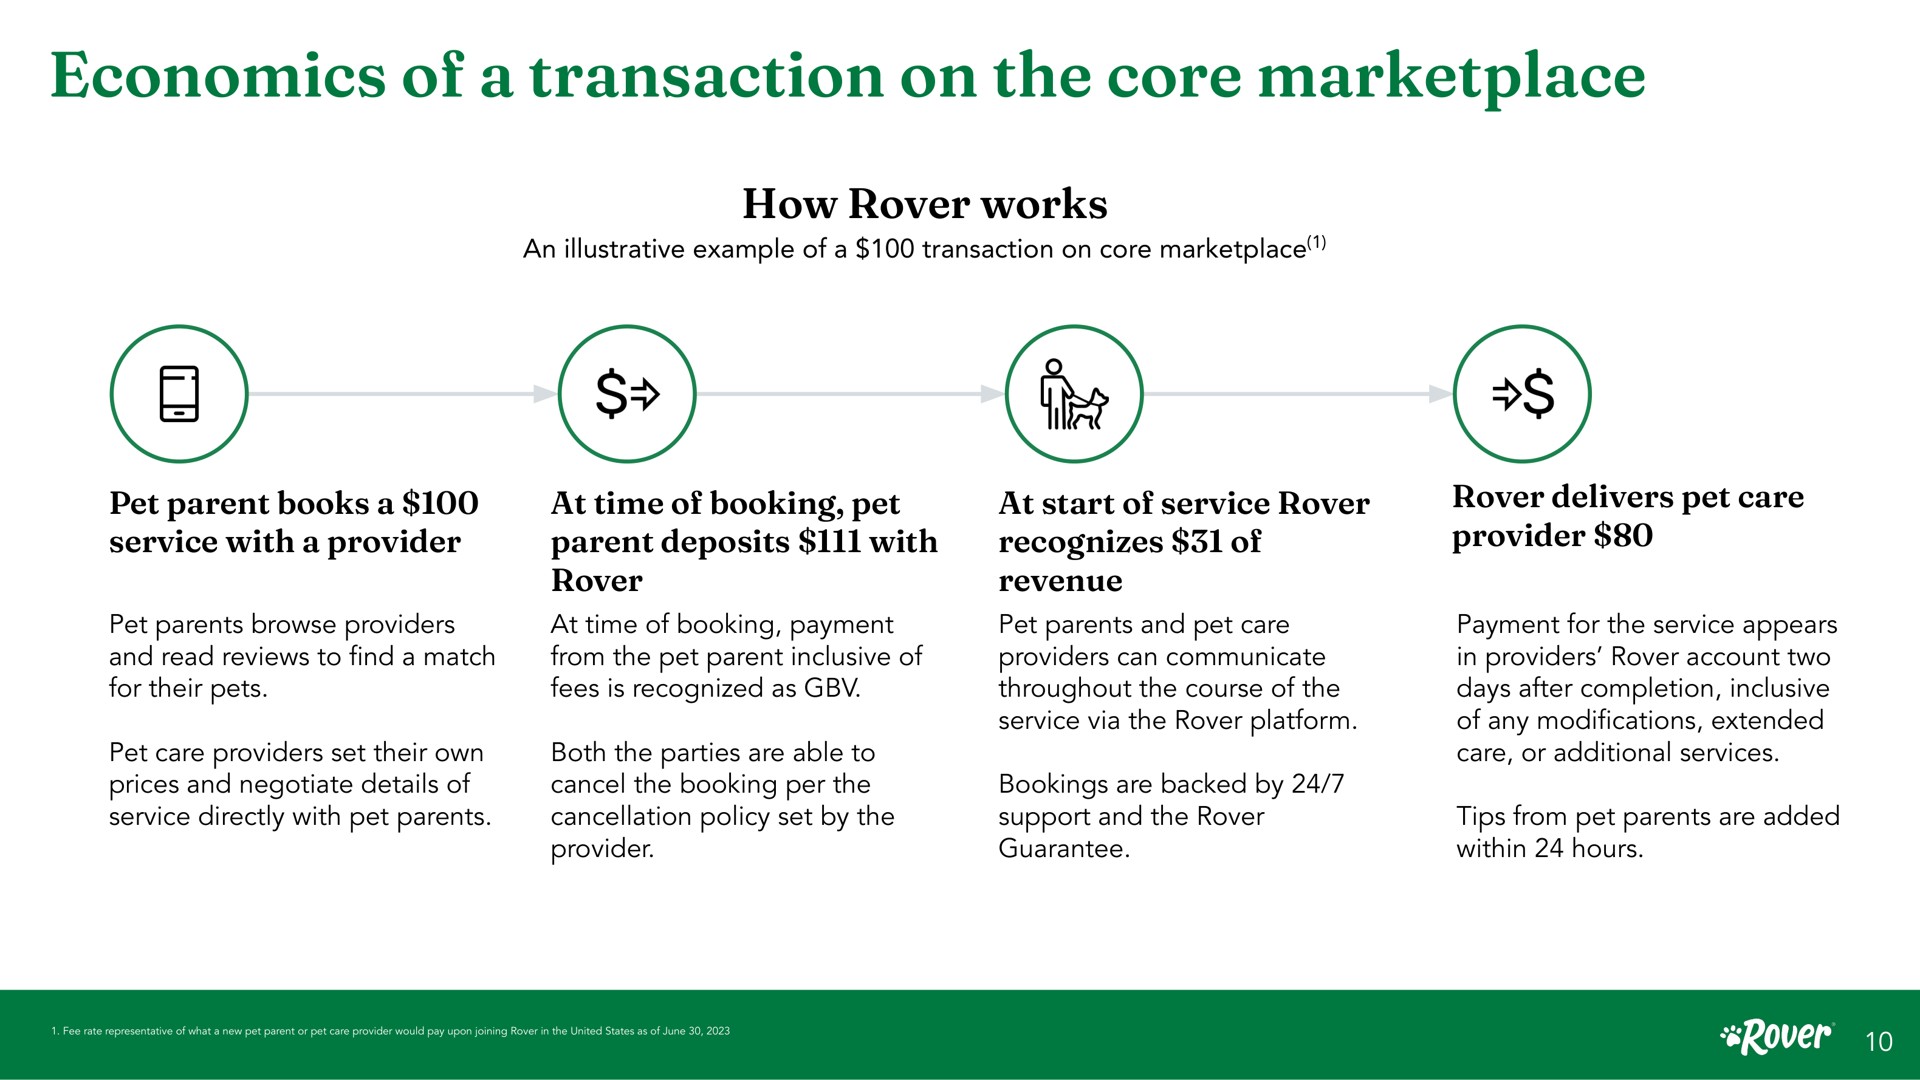 economics of a transaction on the core how rover works an illustrative example pet parent books service with provider at time booking pet parent deposits with rover pet parents browse providers and read reviews to find match for their pets at time booking payment from pet parent inclusive fees is recognized as pet care providers set their own prices and negotiate details service directly with pet parents both parties are able to cancel booking per cancellation policy set by provider at start service rover recognizes revenue pet parents and pet care providers can communicate throughout course service via rover platform bookings are backed by support and rover guarantee rover delivers pet care provider payment for service appears in providers rover account two days after completion inclusive any modifications extended care or additional services tips from pet parents are added within hours | Rover